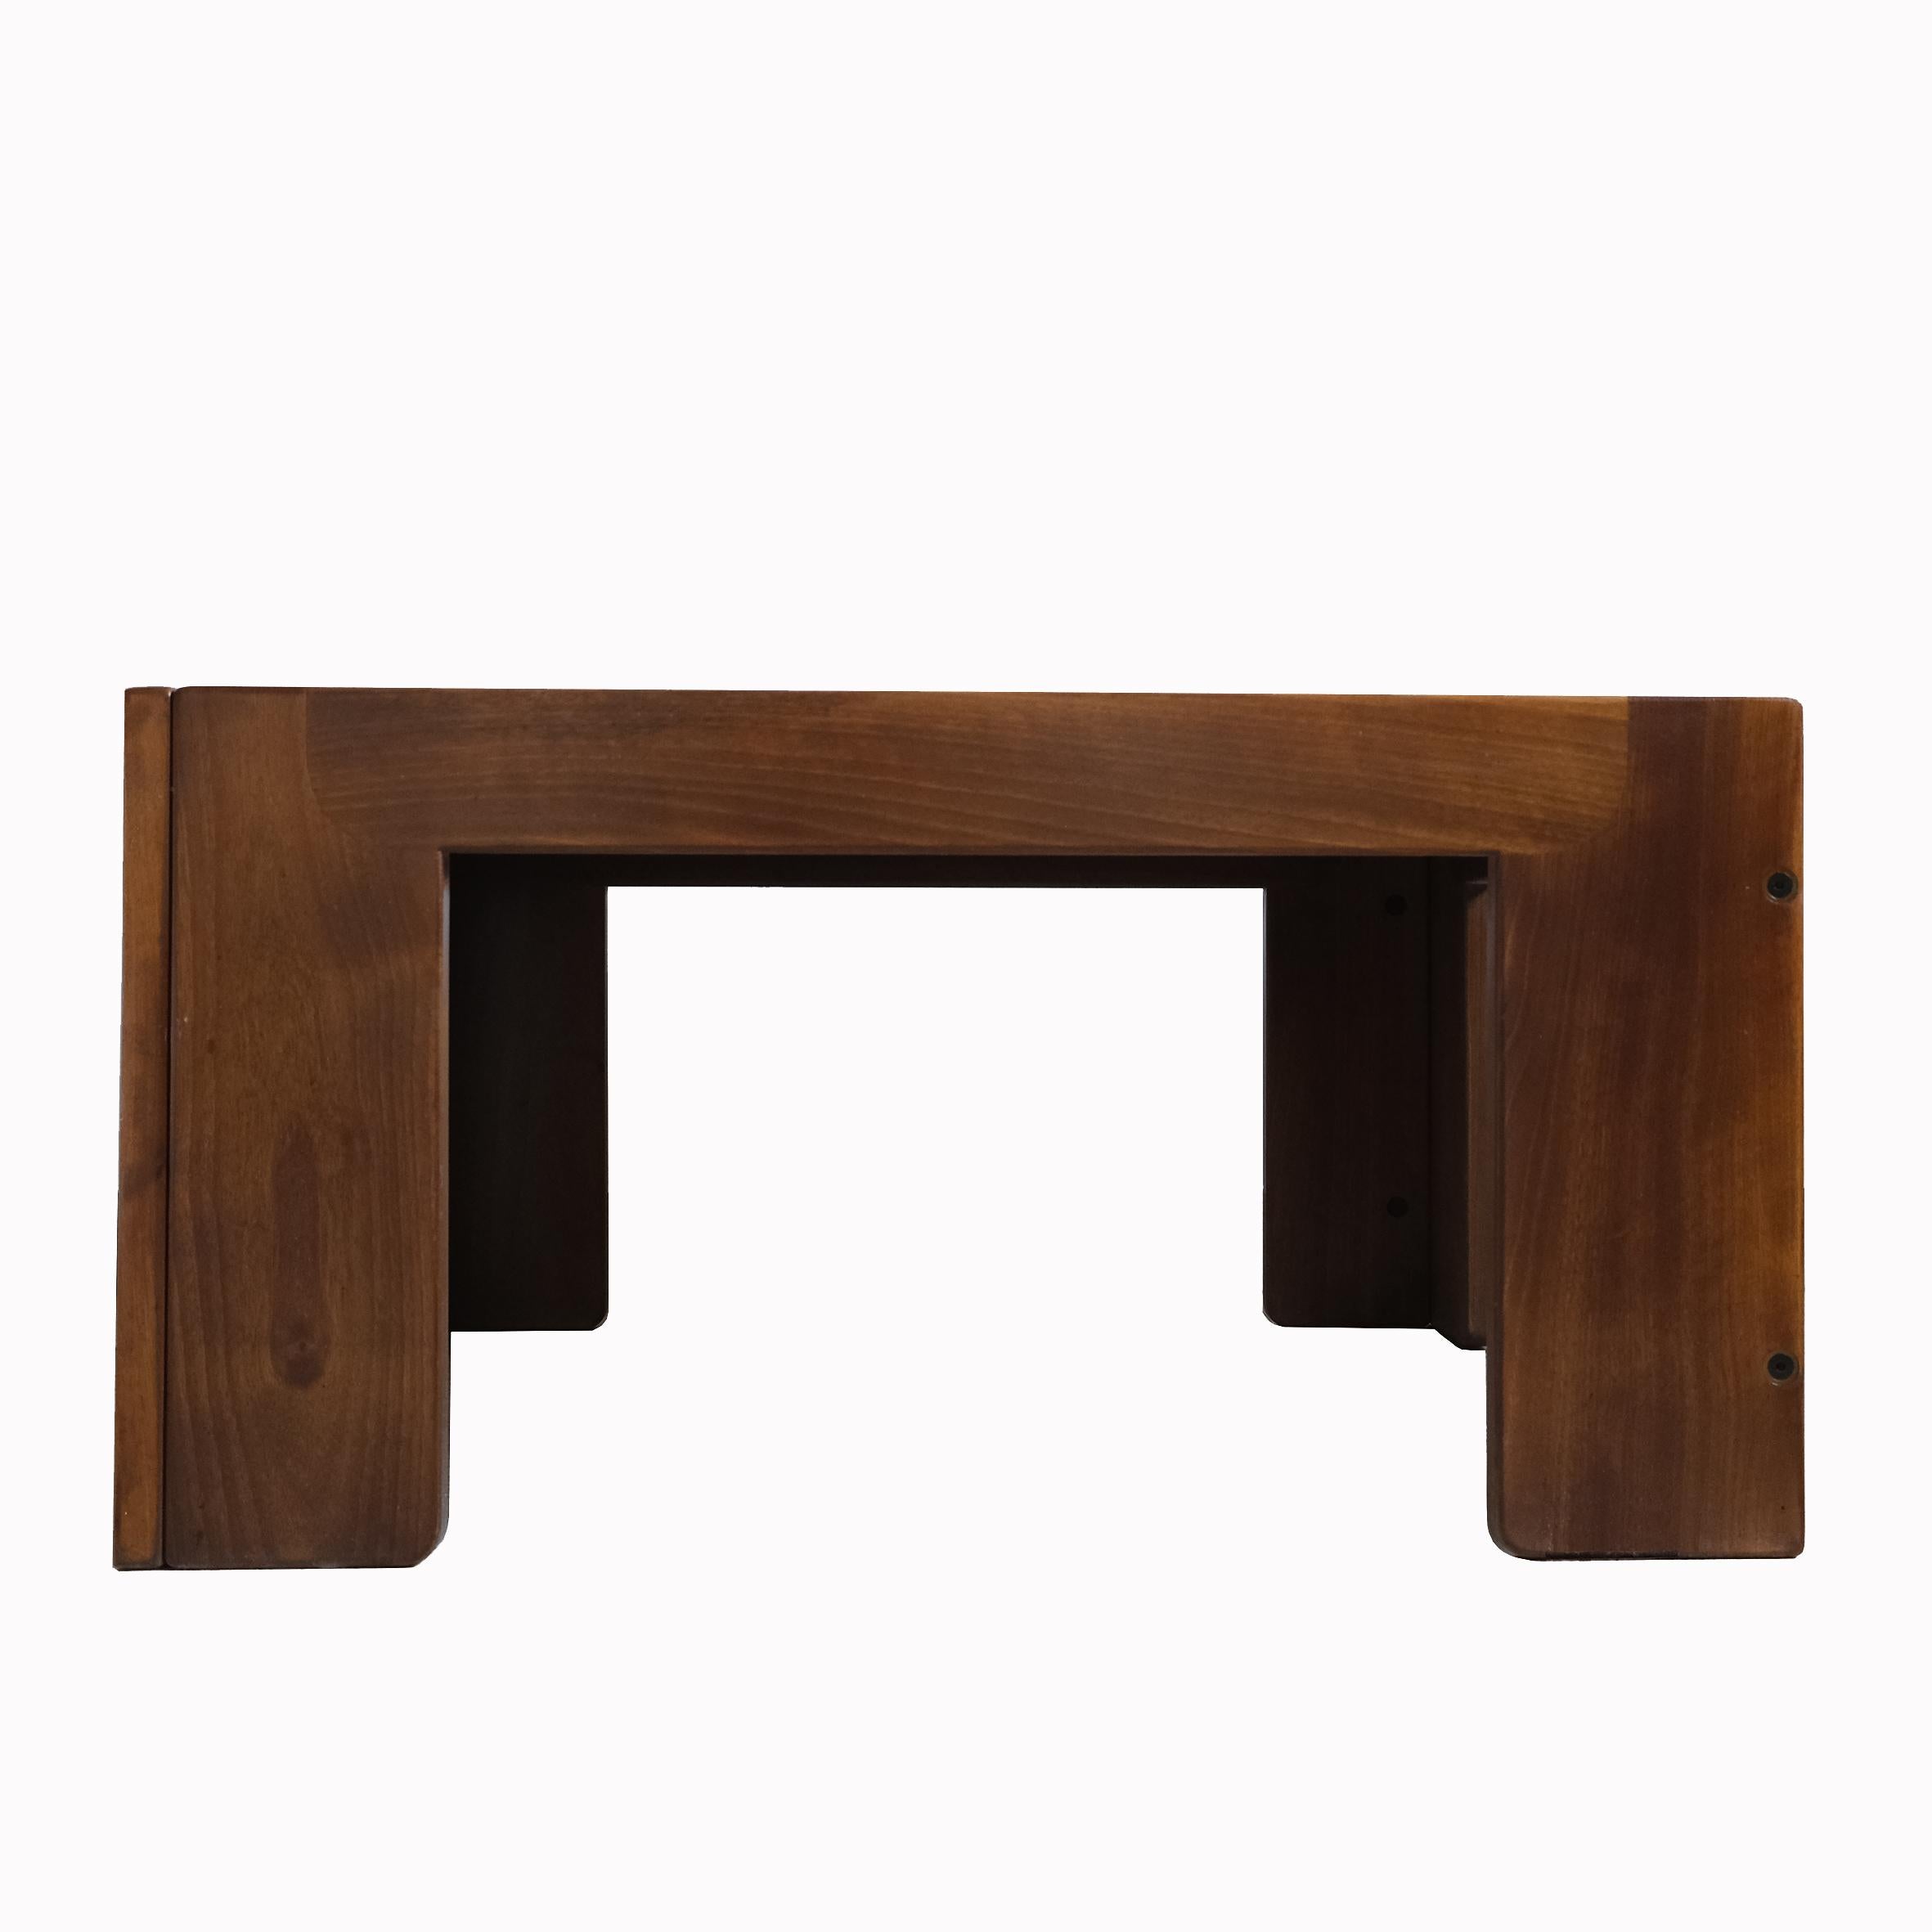 Mid-20th Century Afra & Tobia Scarpa, A Low Table, Model 771, Cassina, 1960s For Sale